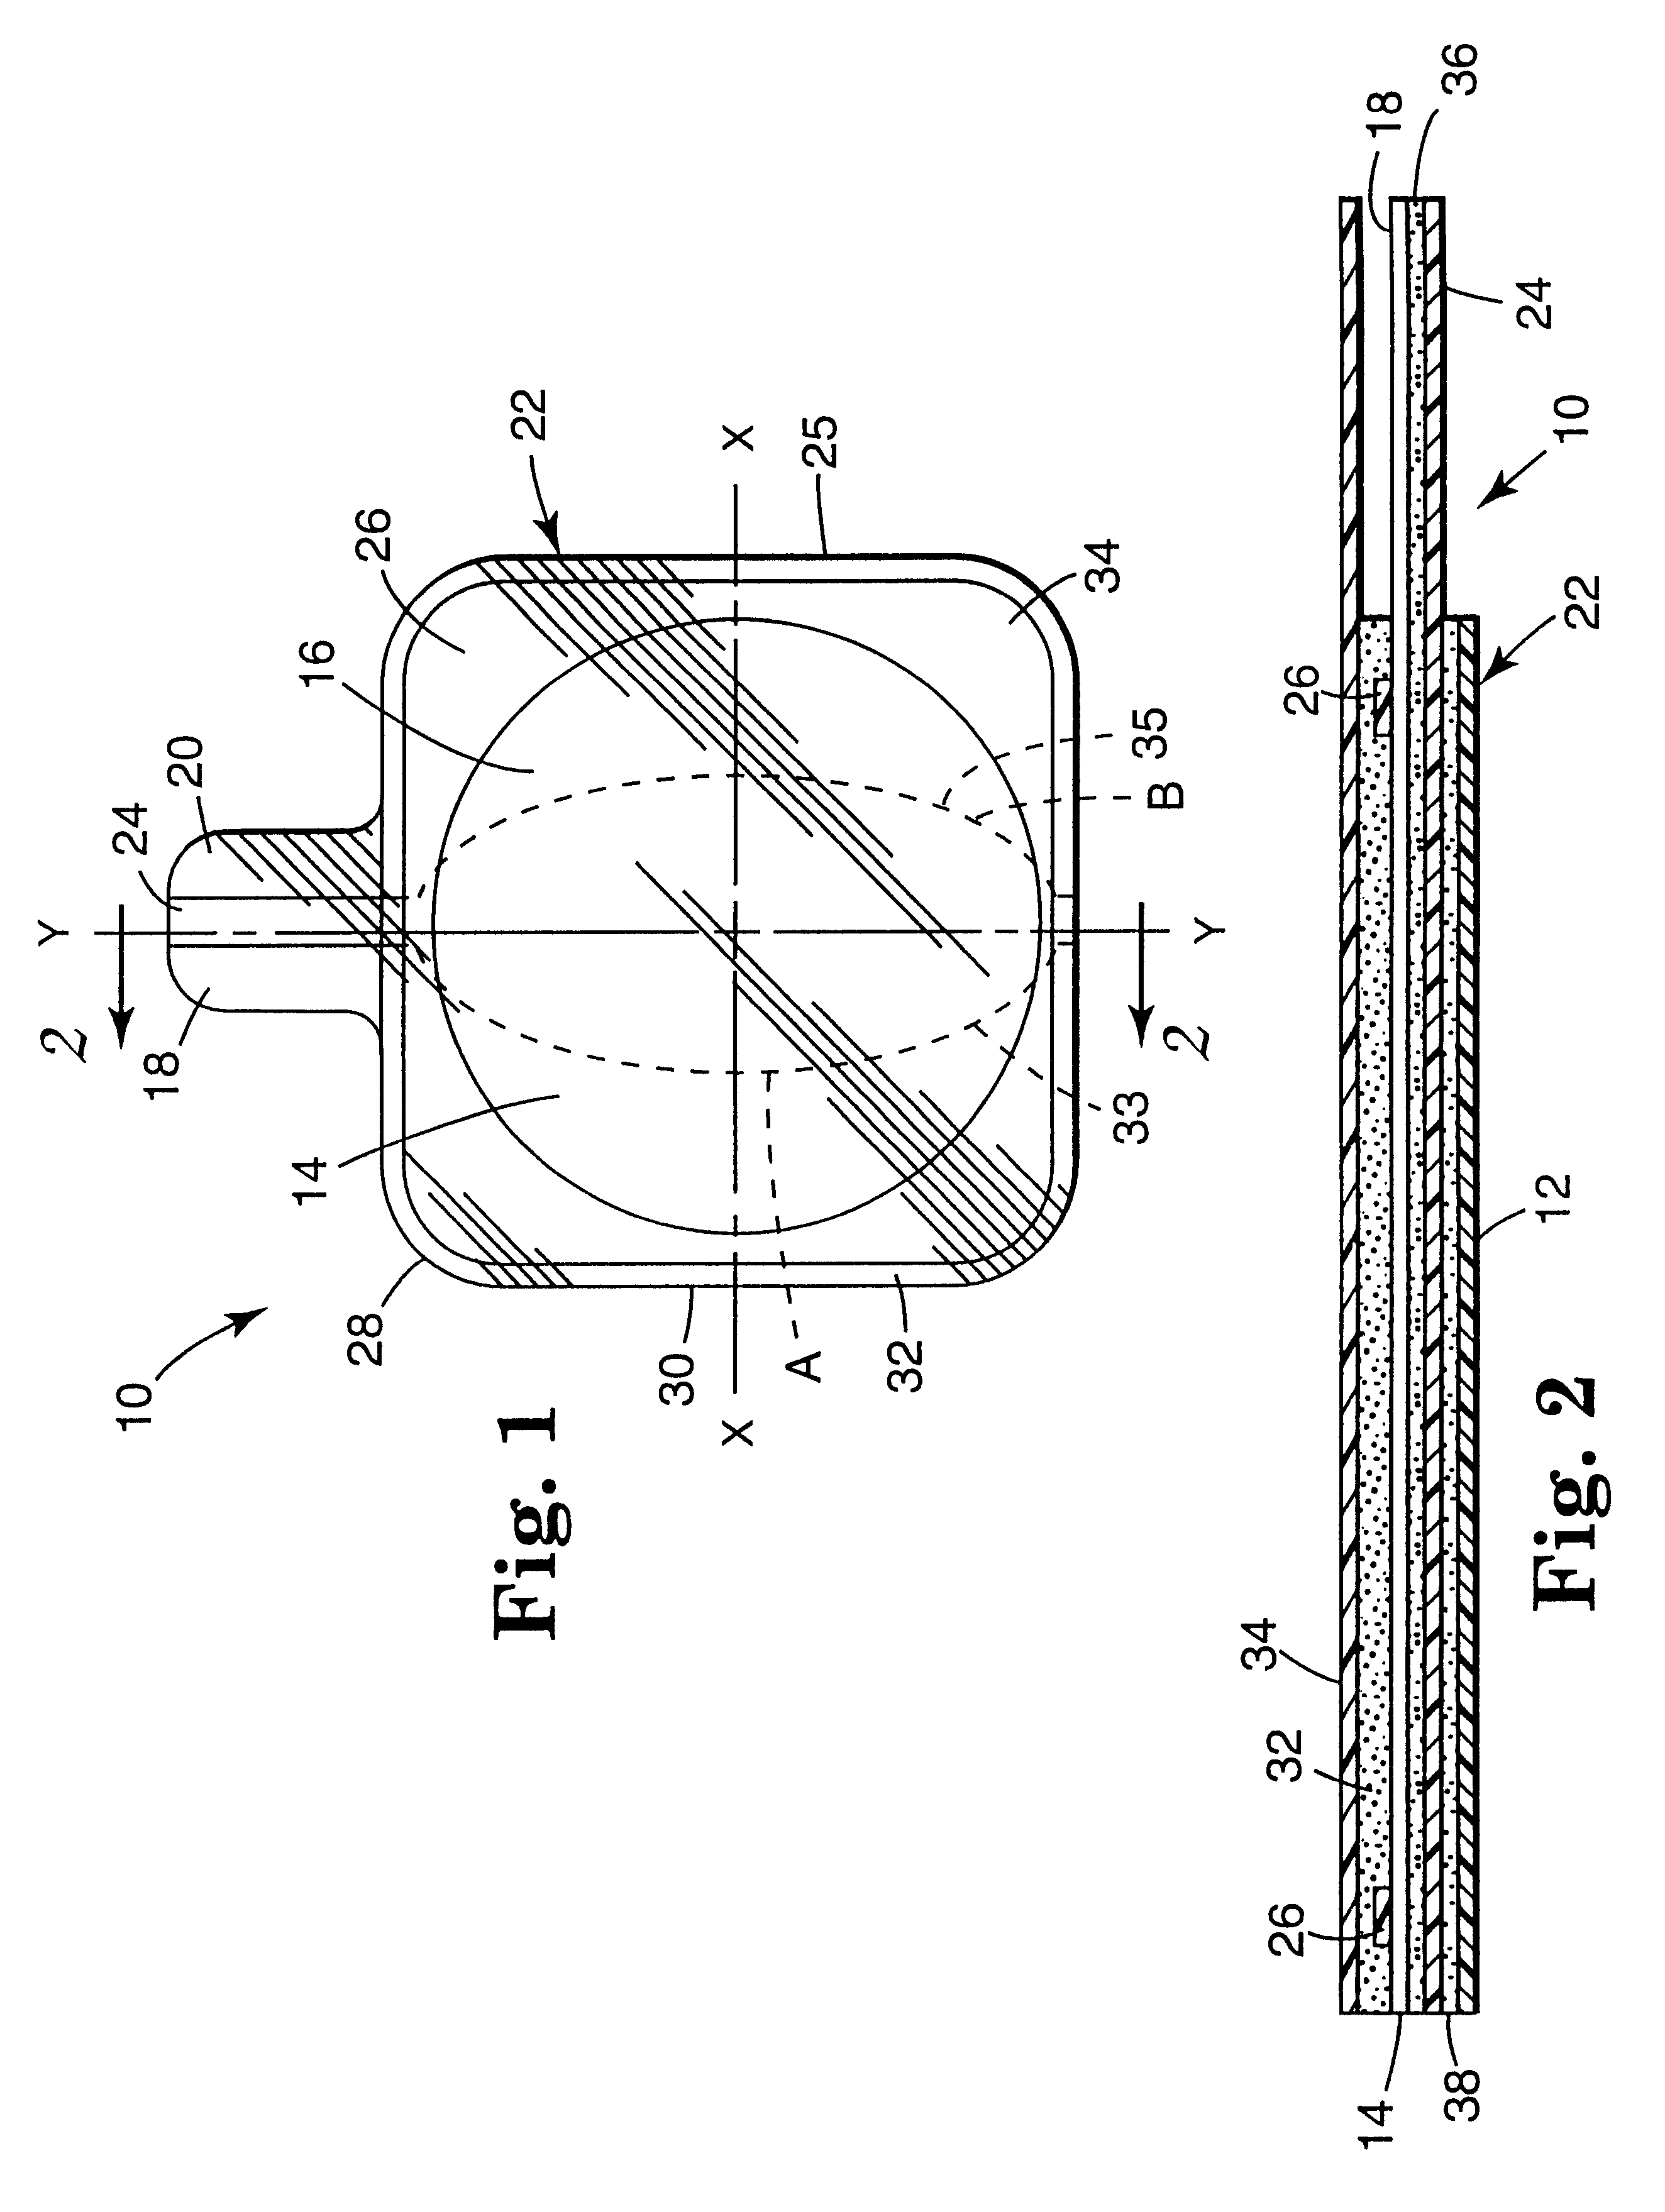 Method and apparatus for controlling contact of biomedical electrodes with patient skin